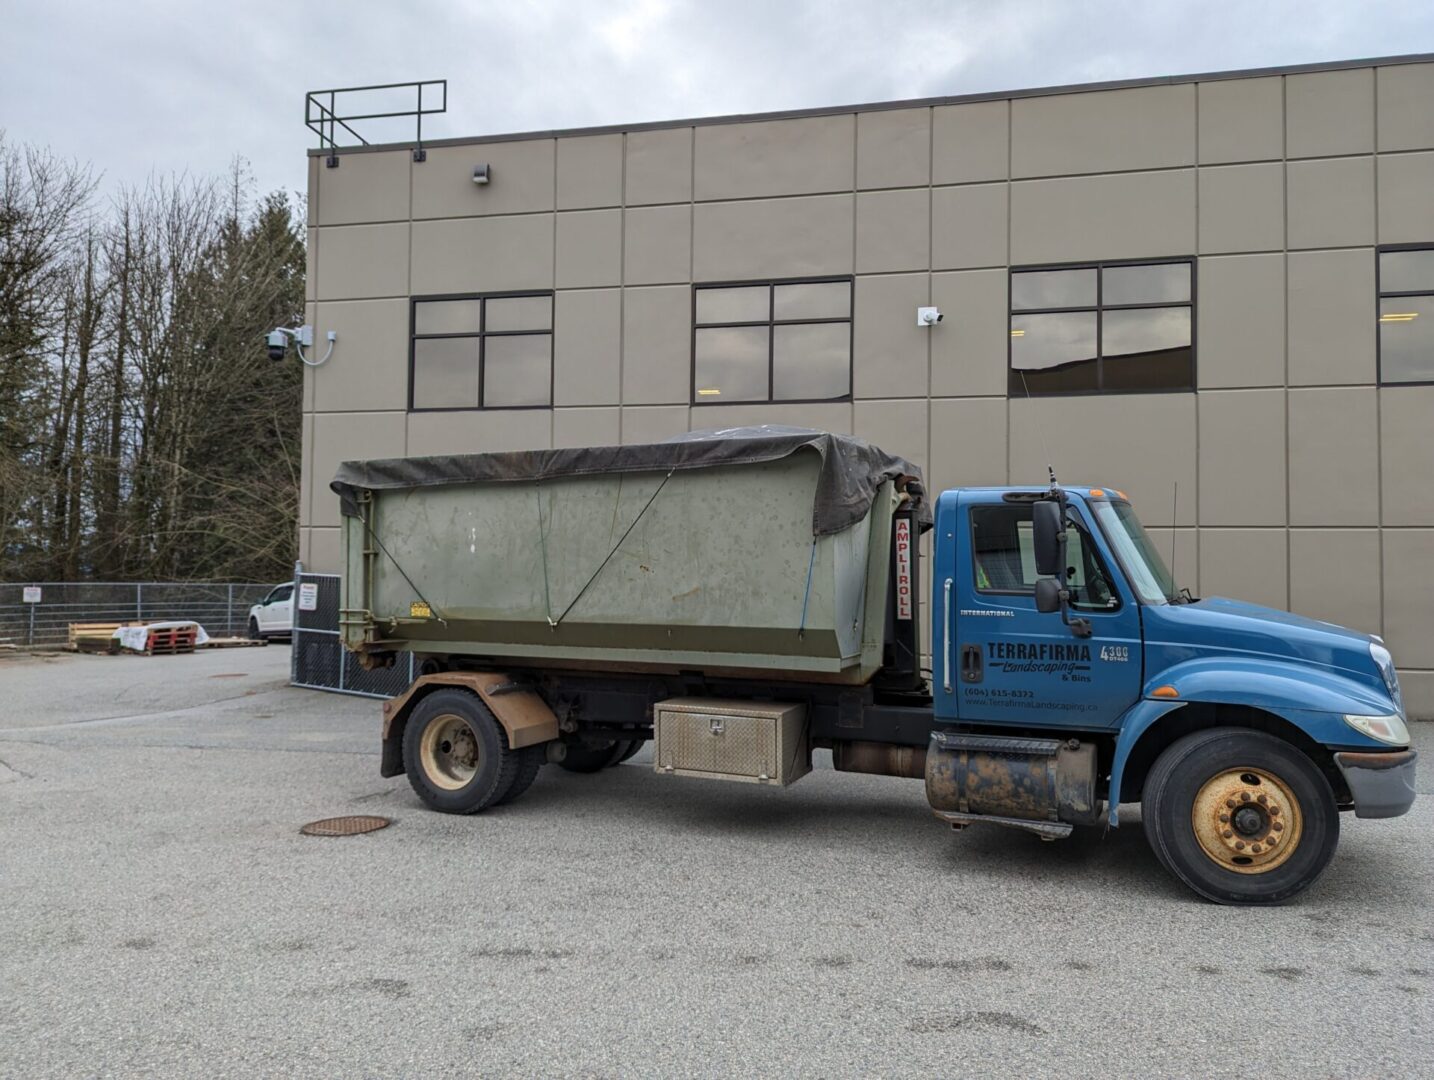 A blue dump truck with a dirty green bin parked beside a gray industrial building under a cloudy sky.